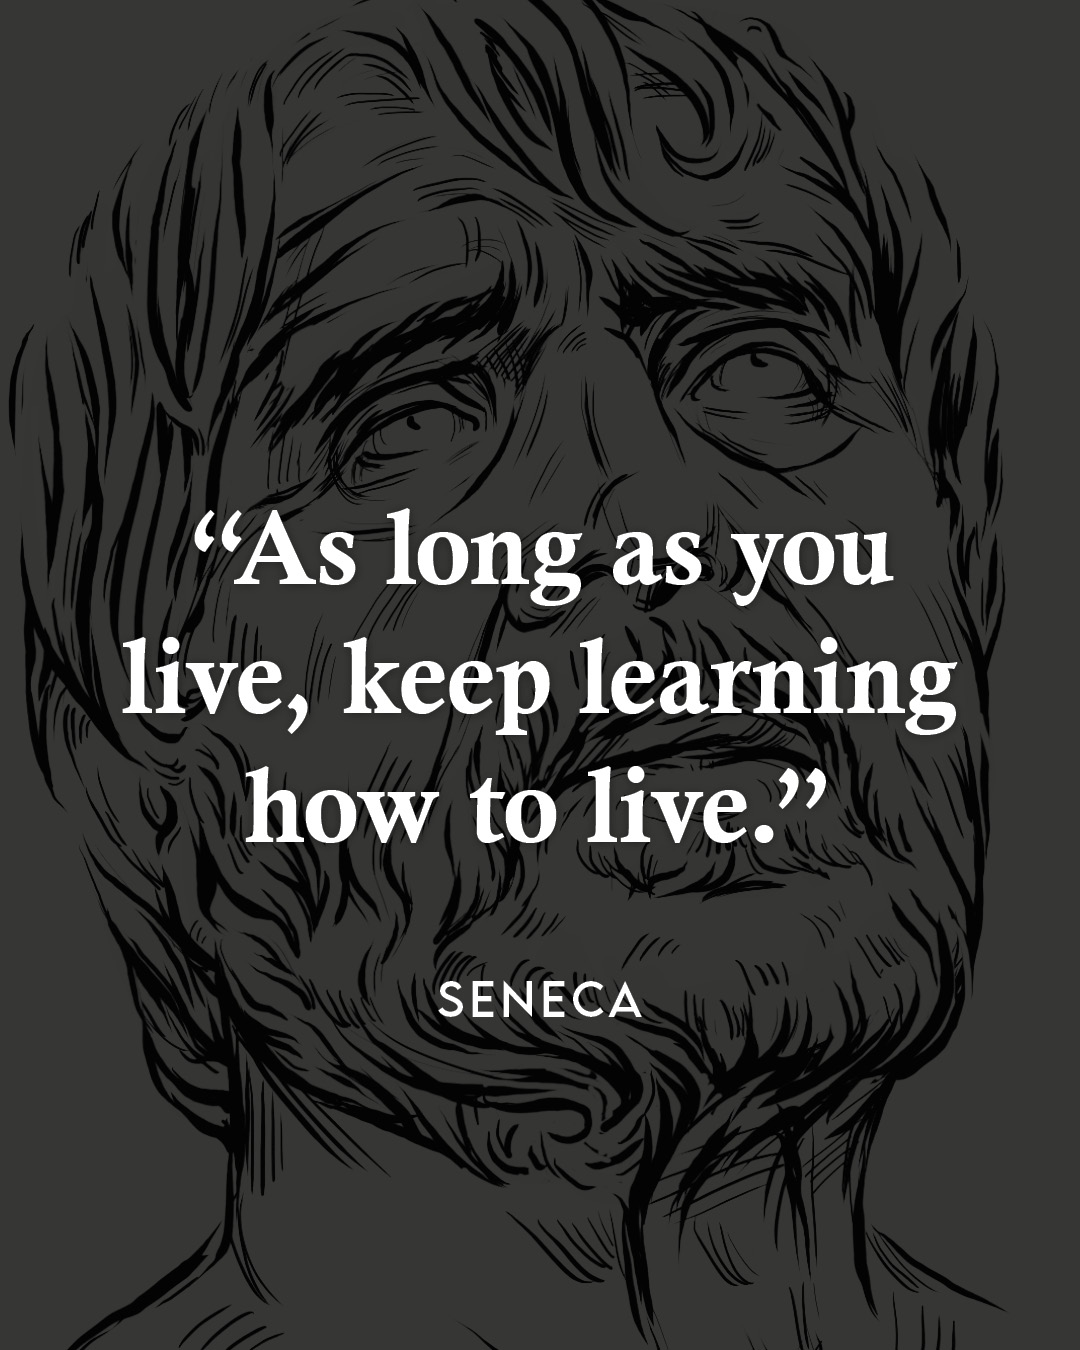 Seneca – As long as you live, keep learning how to live.